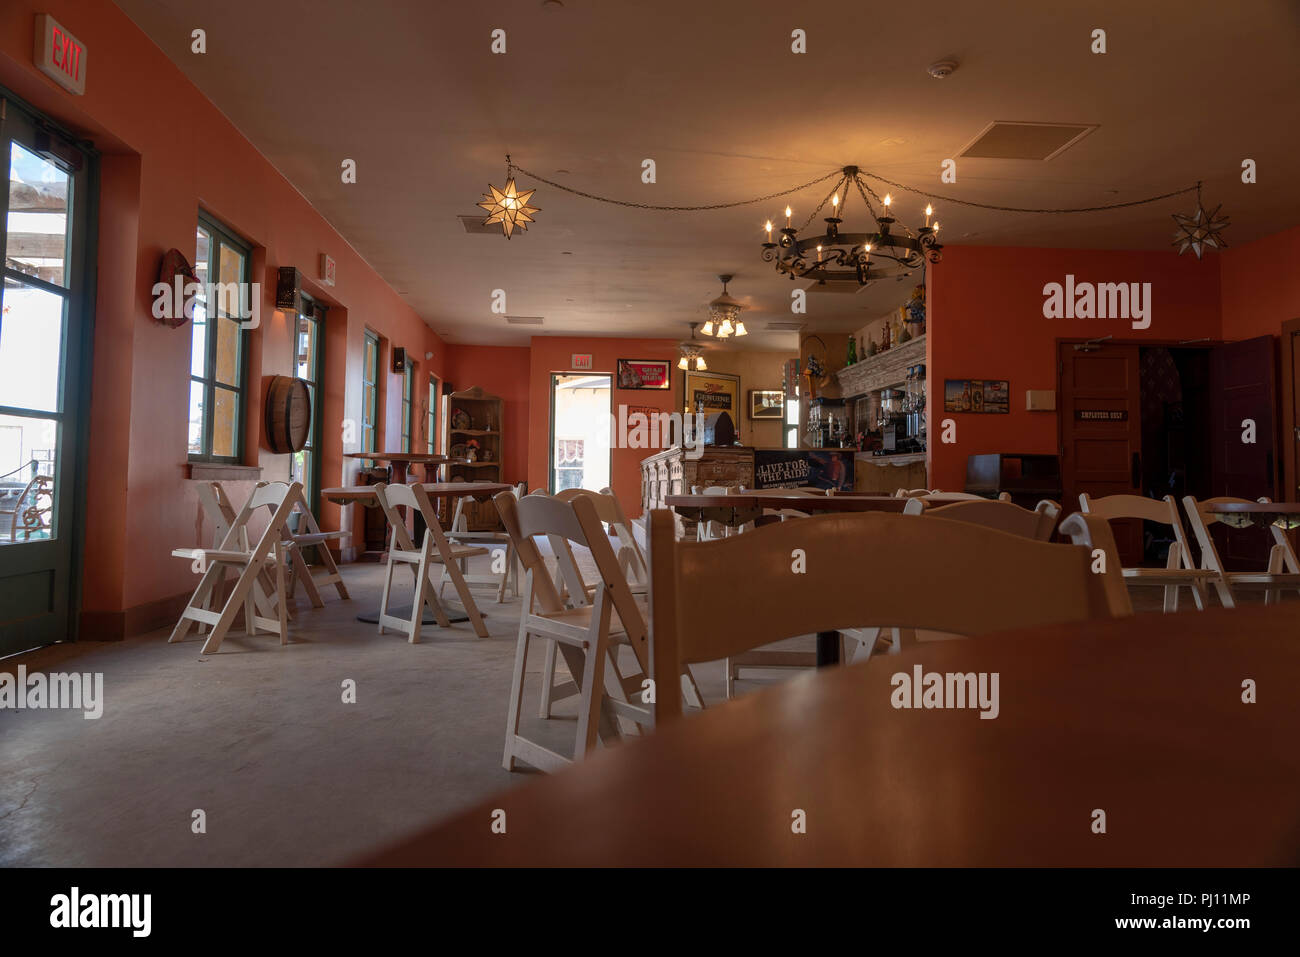 Restaurant with bar at end, interior, orange walls, white folding chairs and tables. Stock Photo